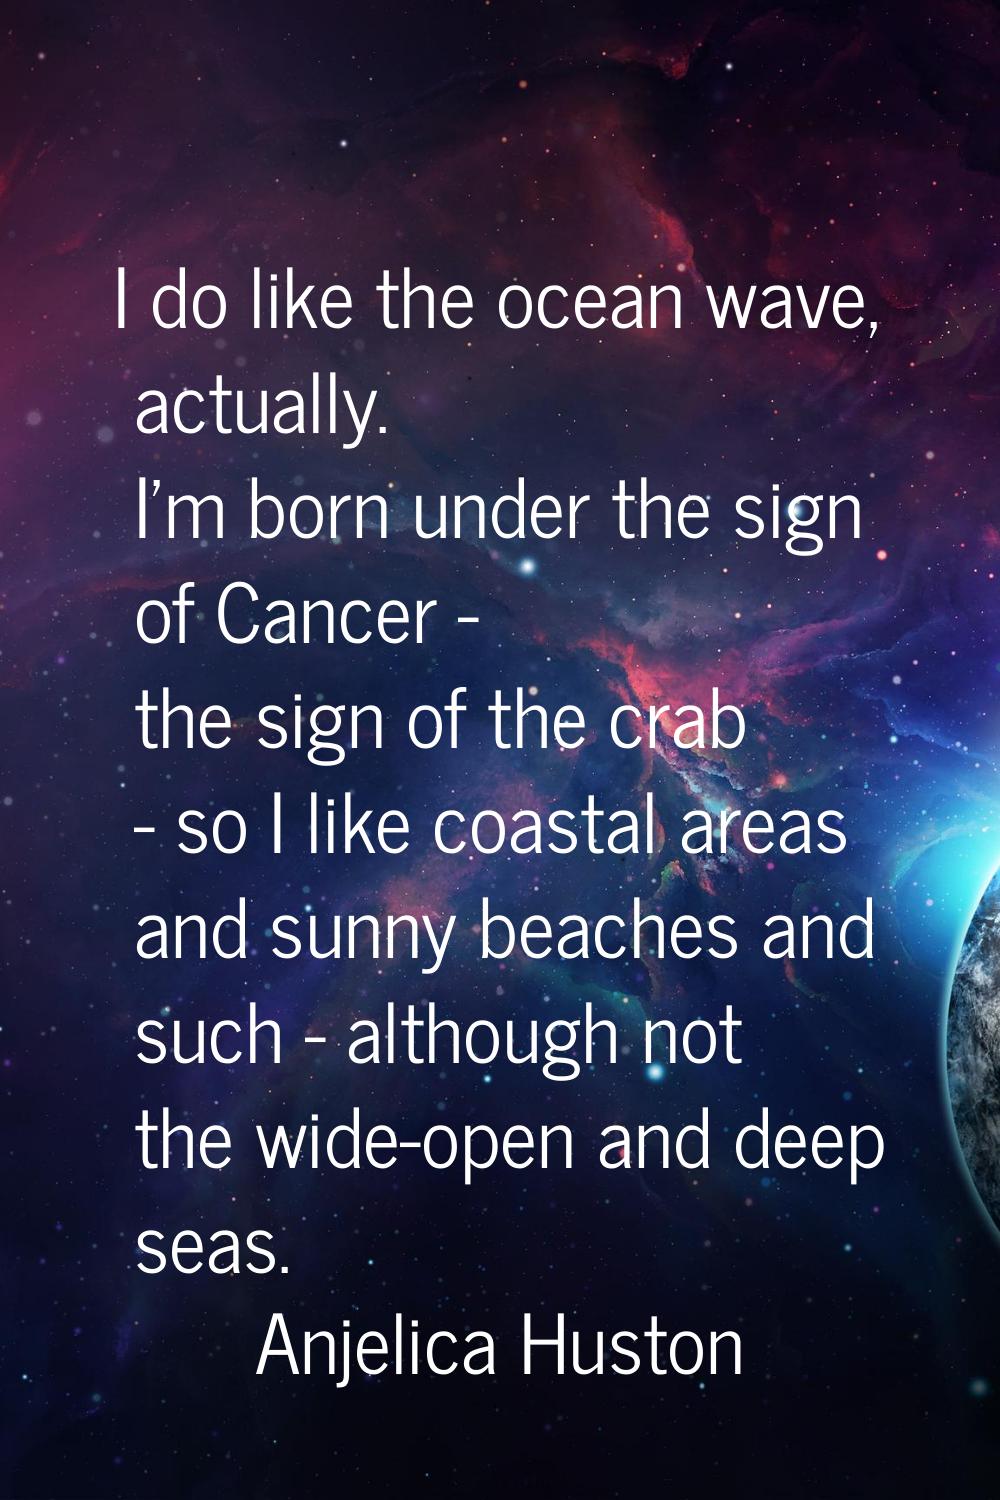 I do like the ocean wave, actually. I'm born under the sign of Cancer - the sign of the crab - so I